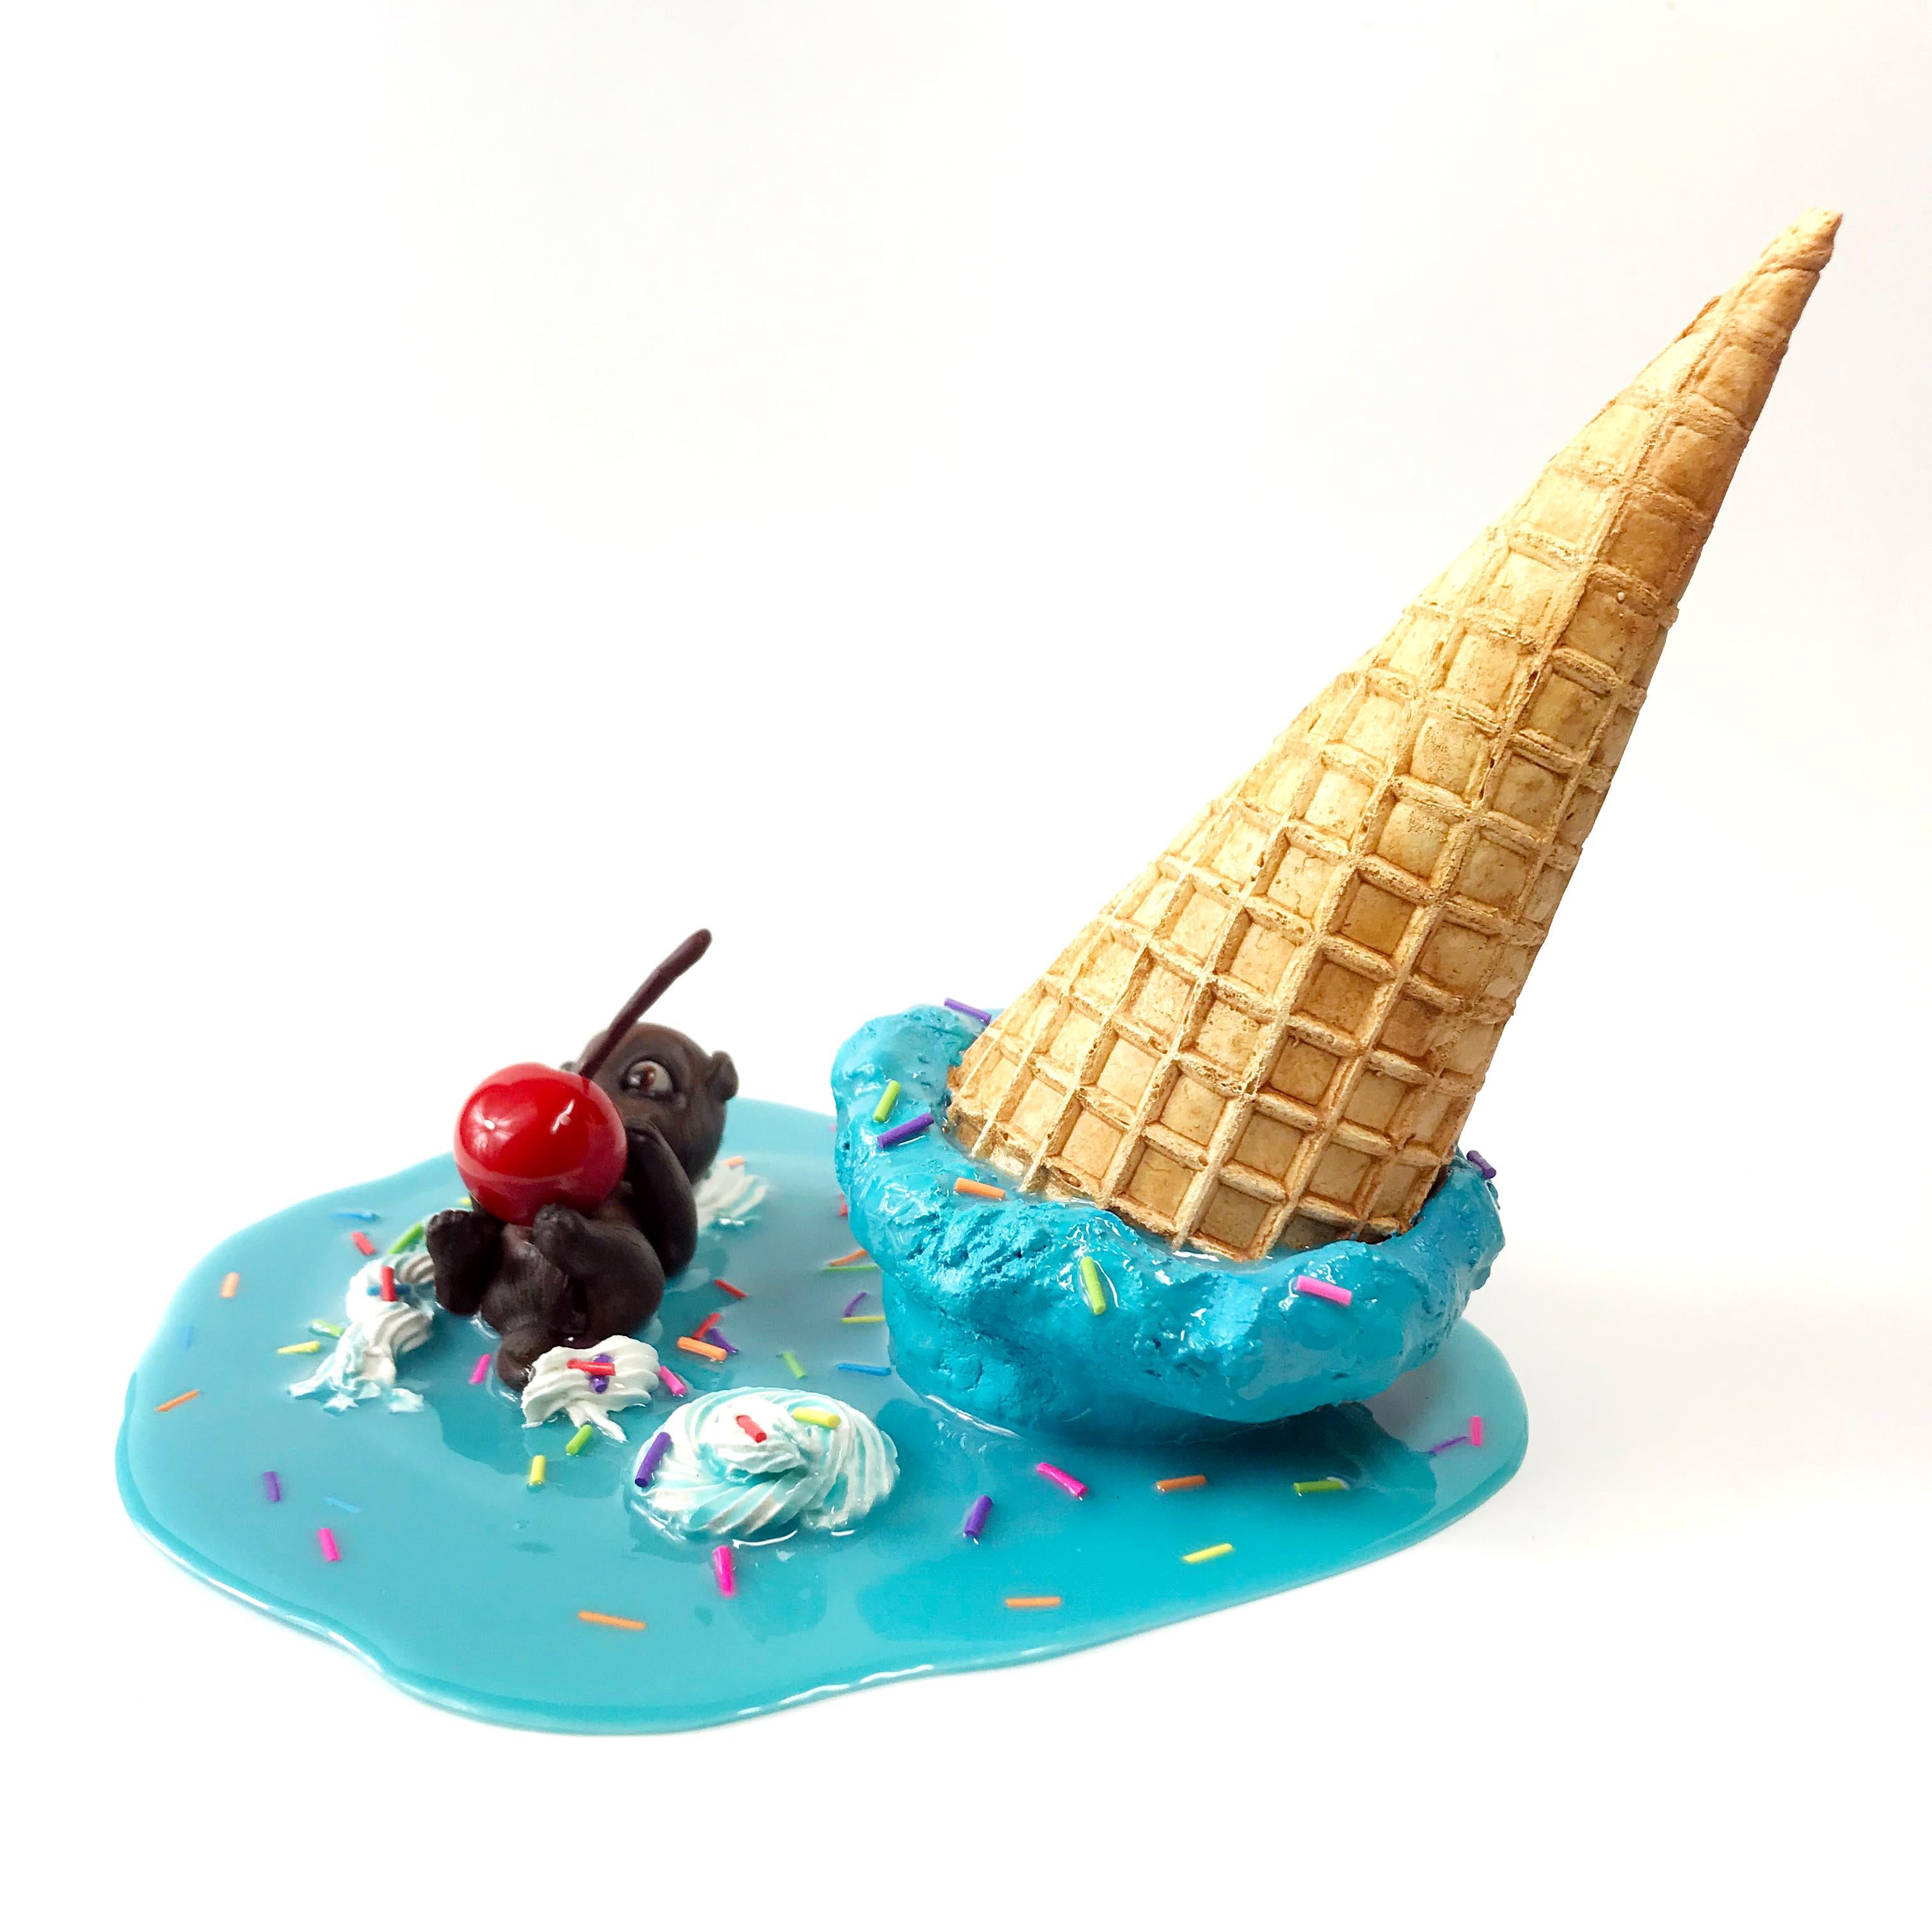 Blue Moon - Waffle Cone Otter - Sculpture by Corina St. Martin